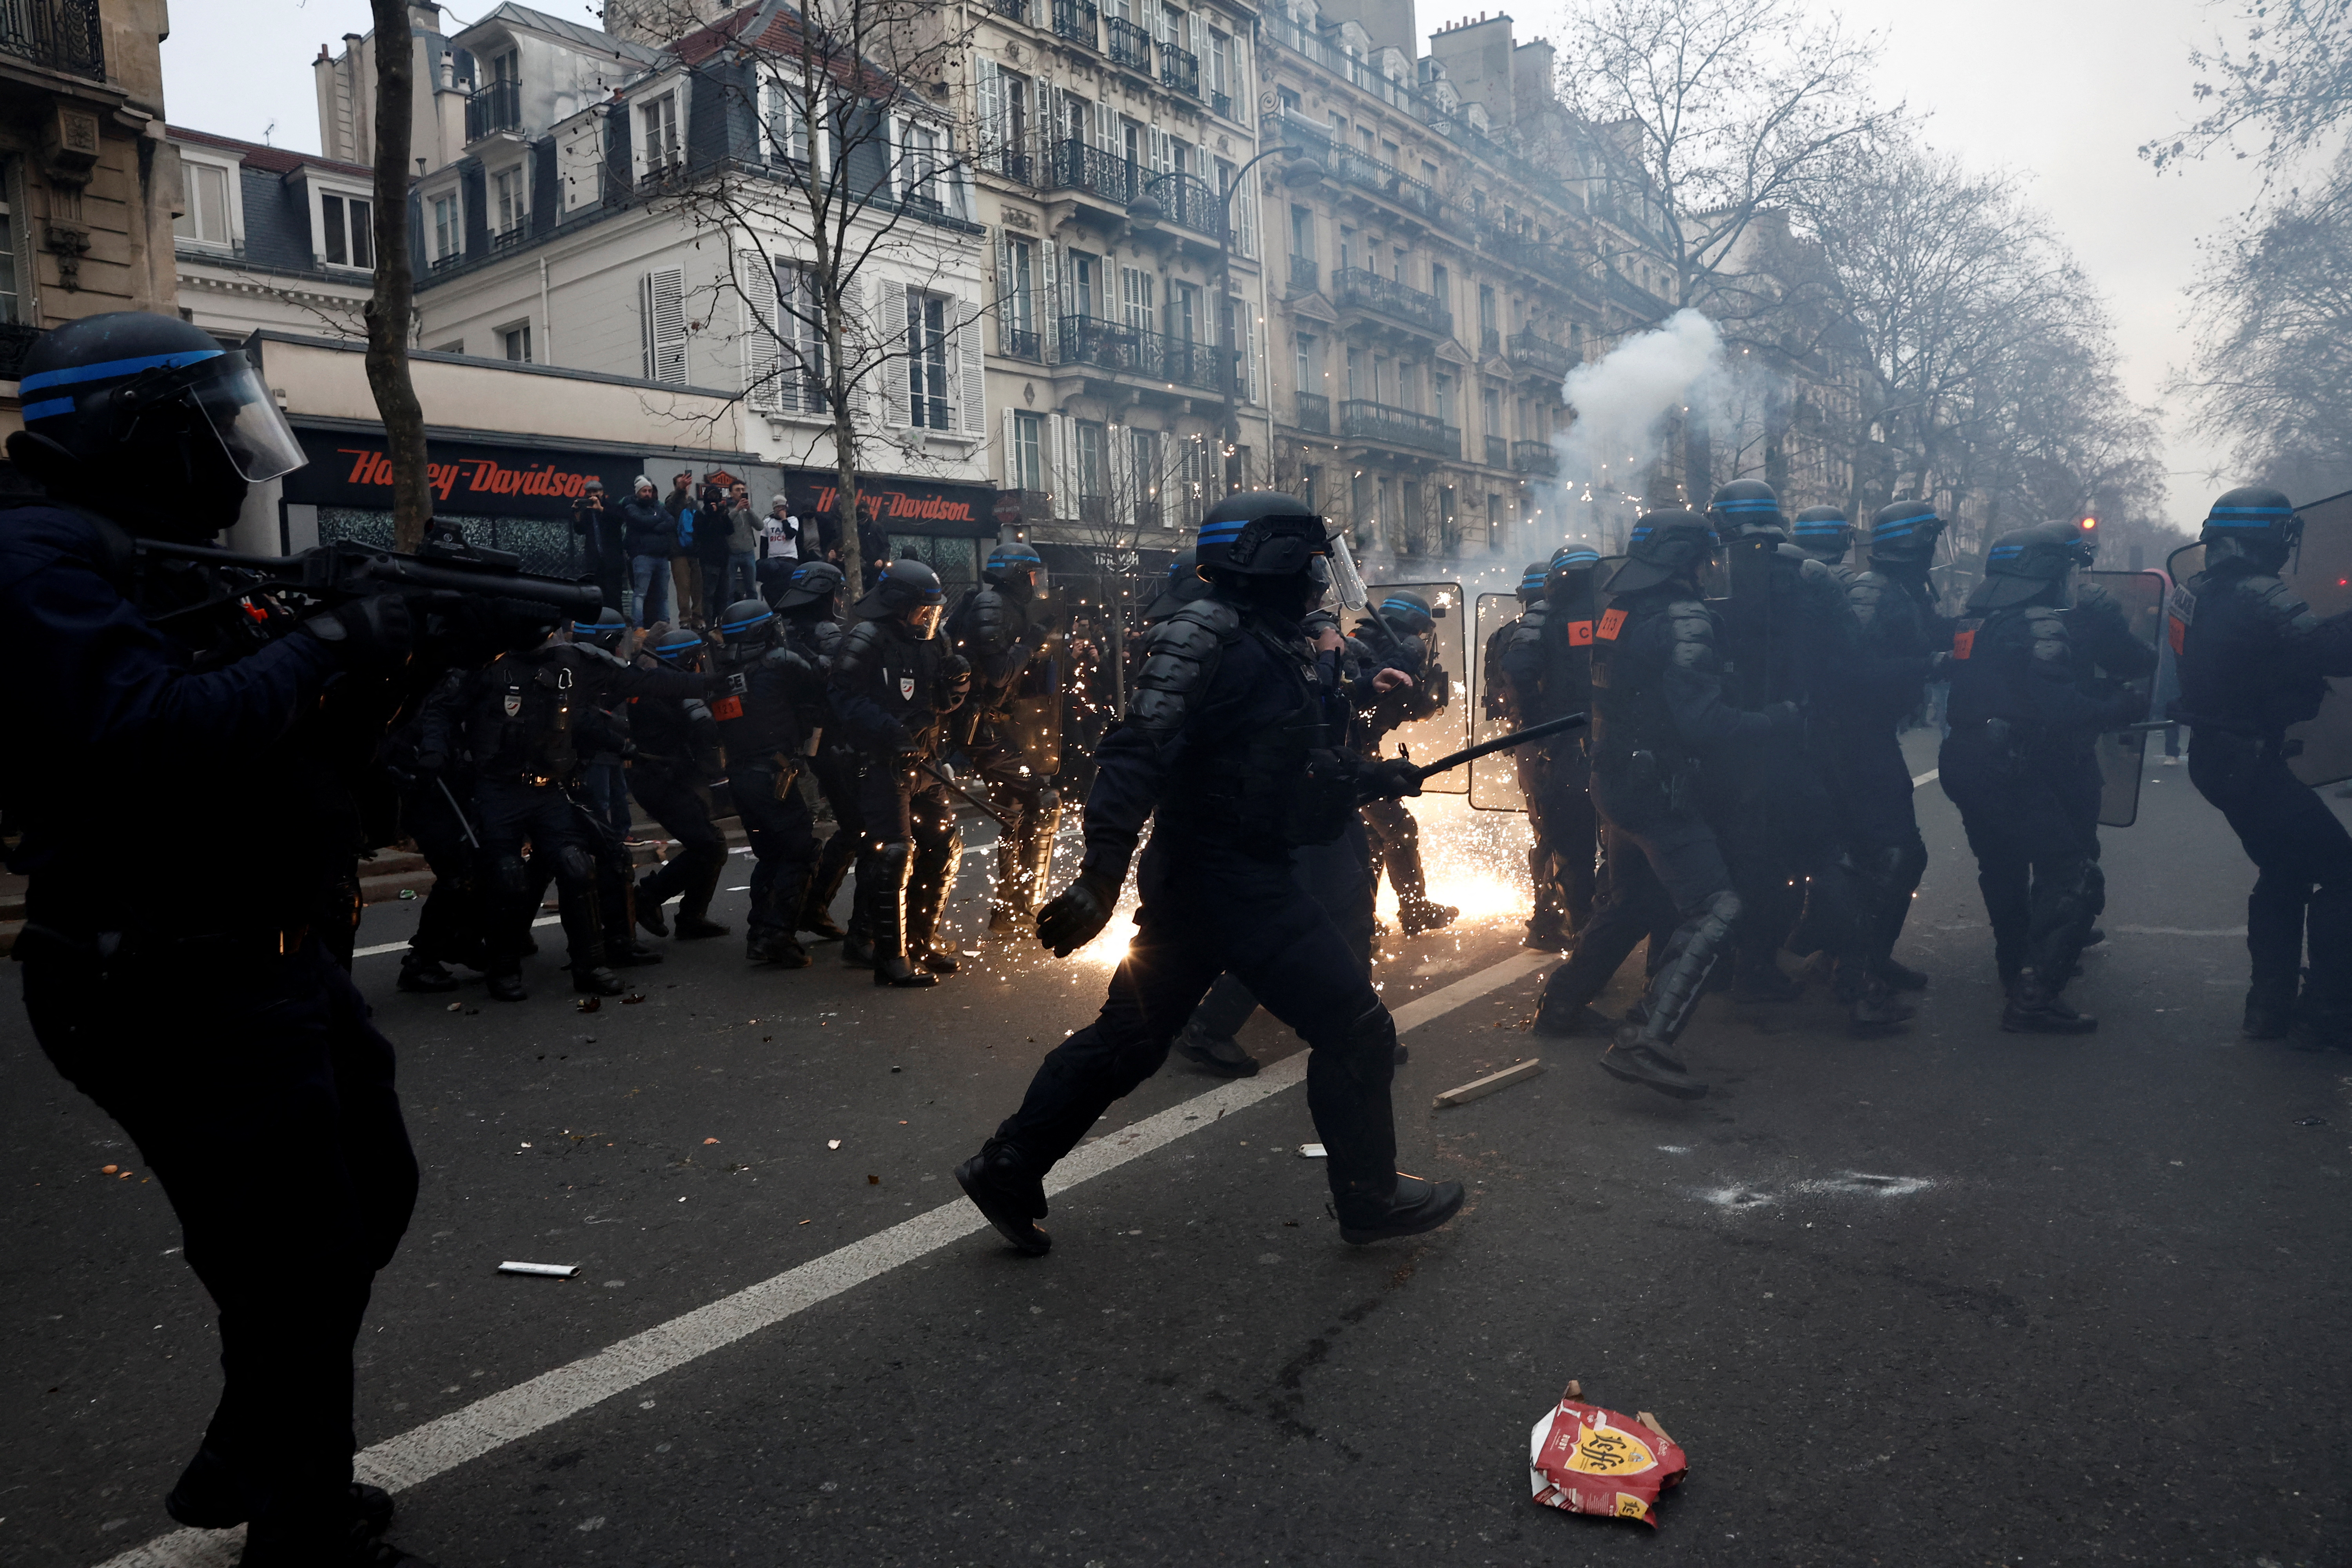 A nationwide strike in France to protest pension reform